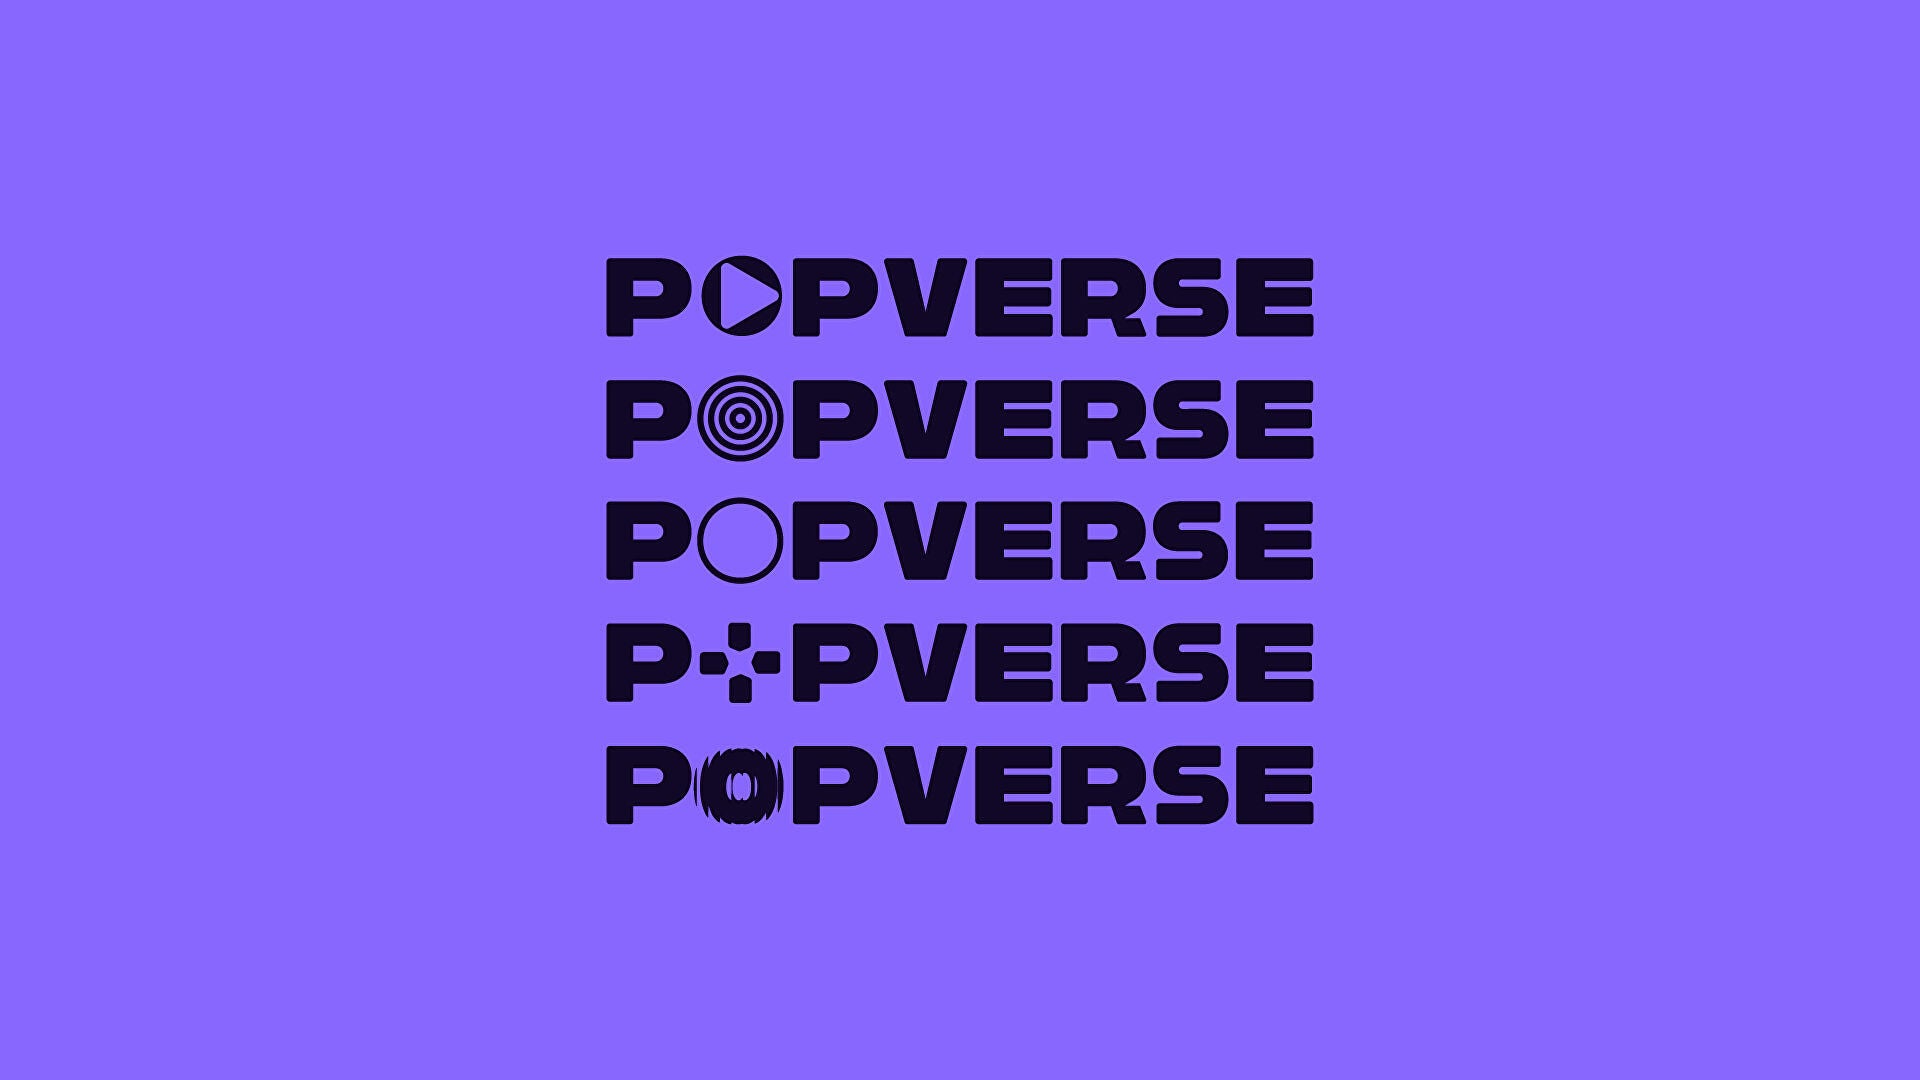 Image for Popverse is a new pop culture site from our business dad